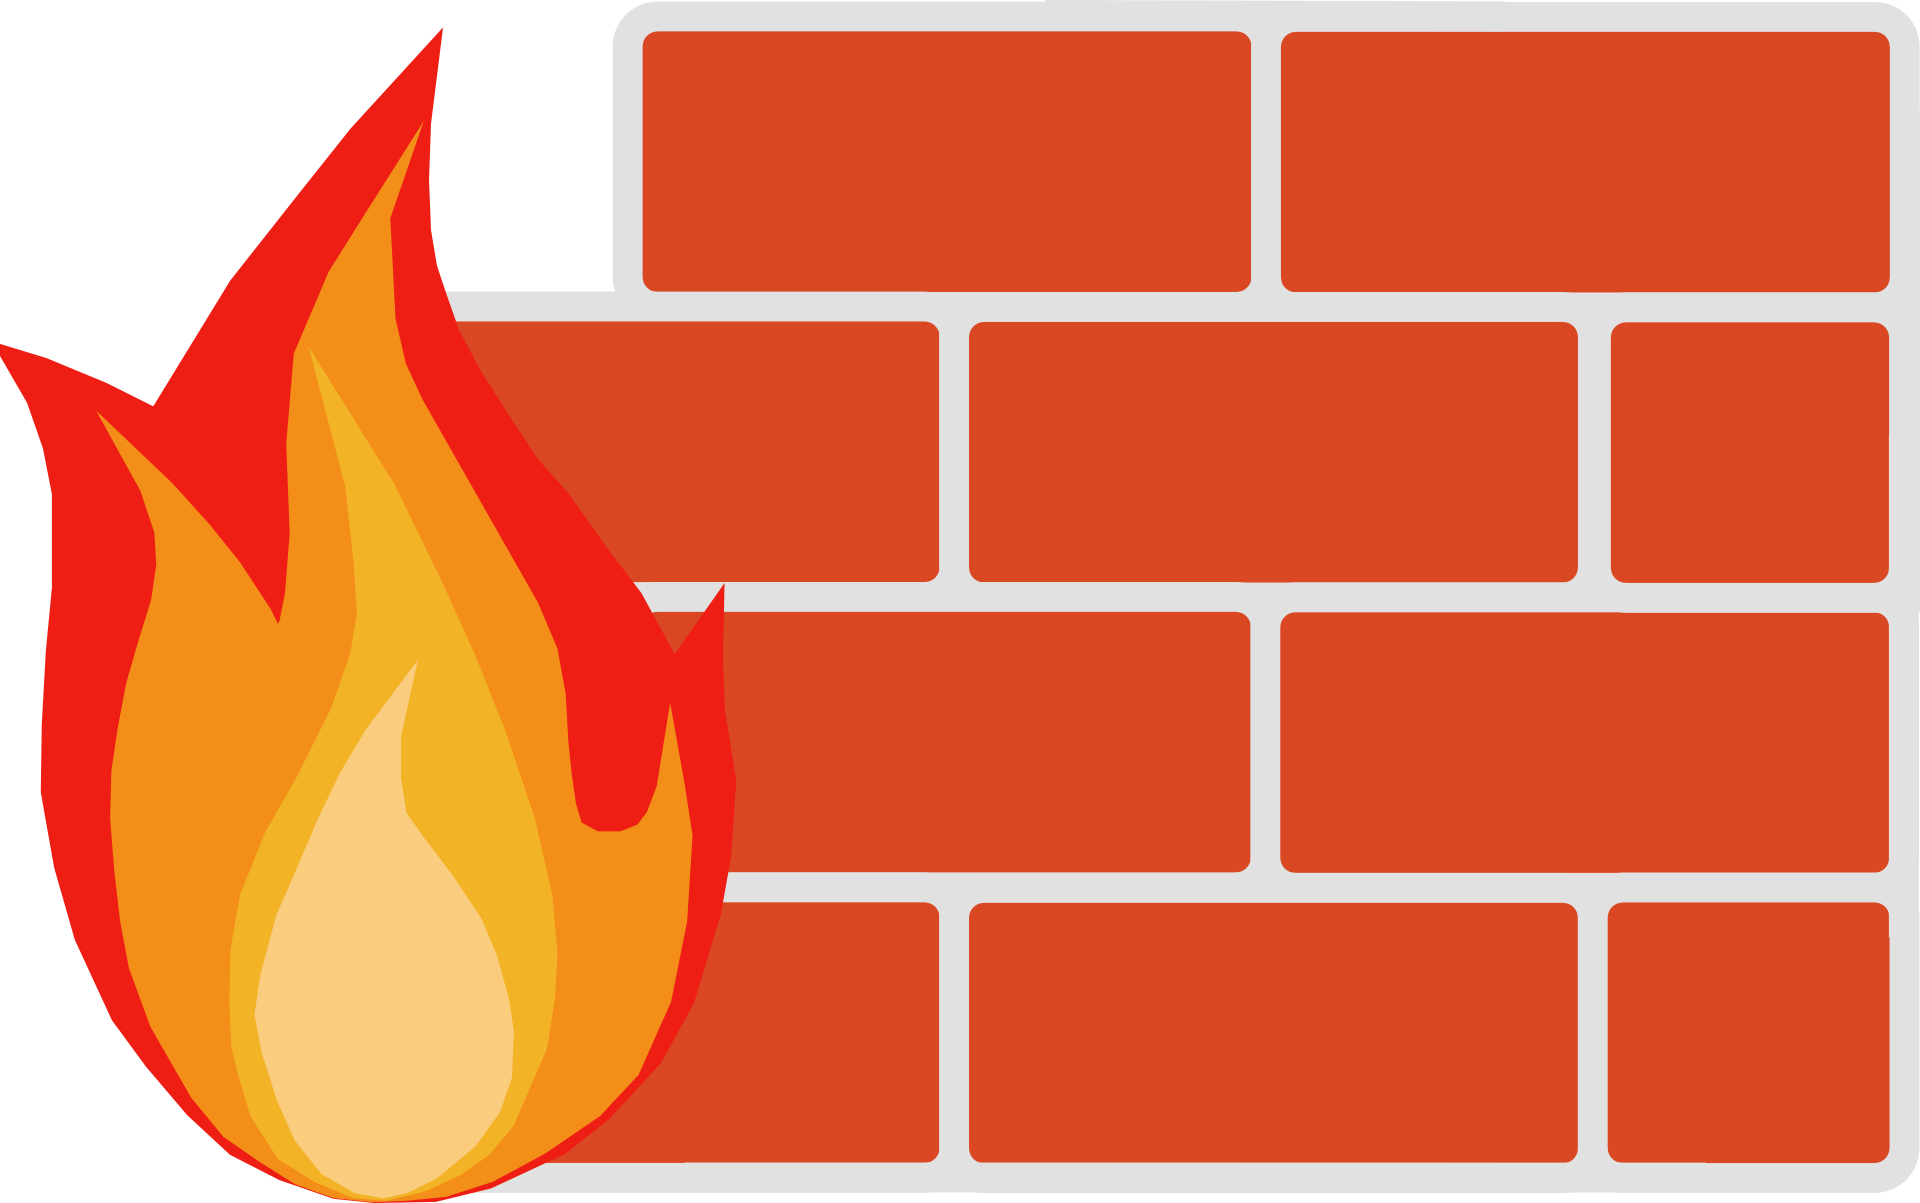 You Need More than a Firewall to Secure Your Business